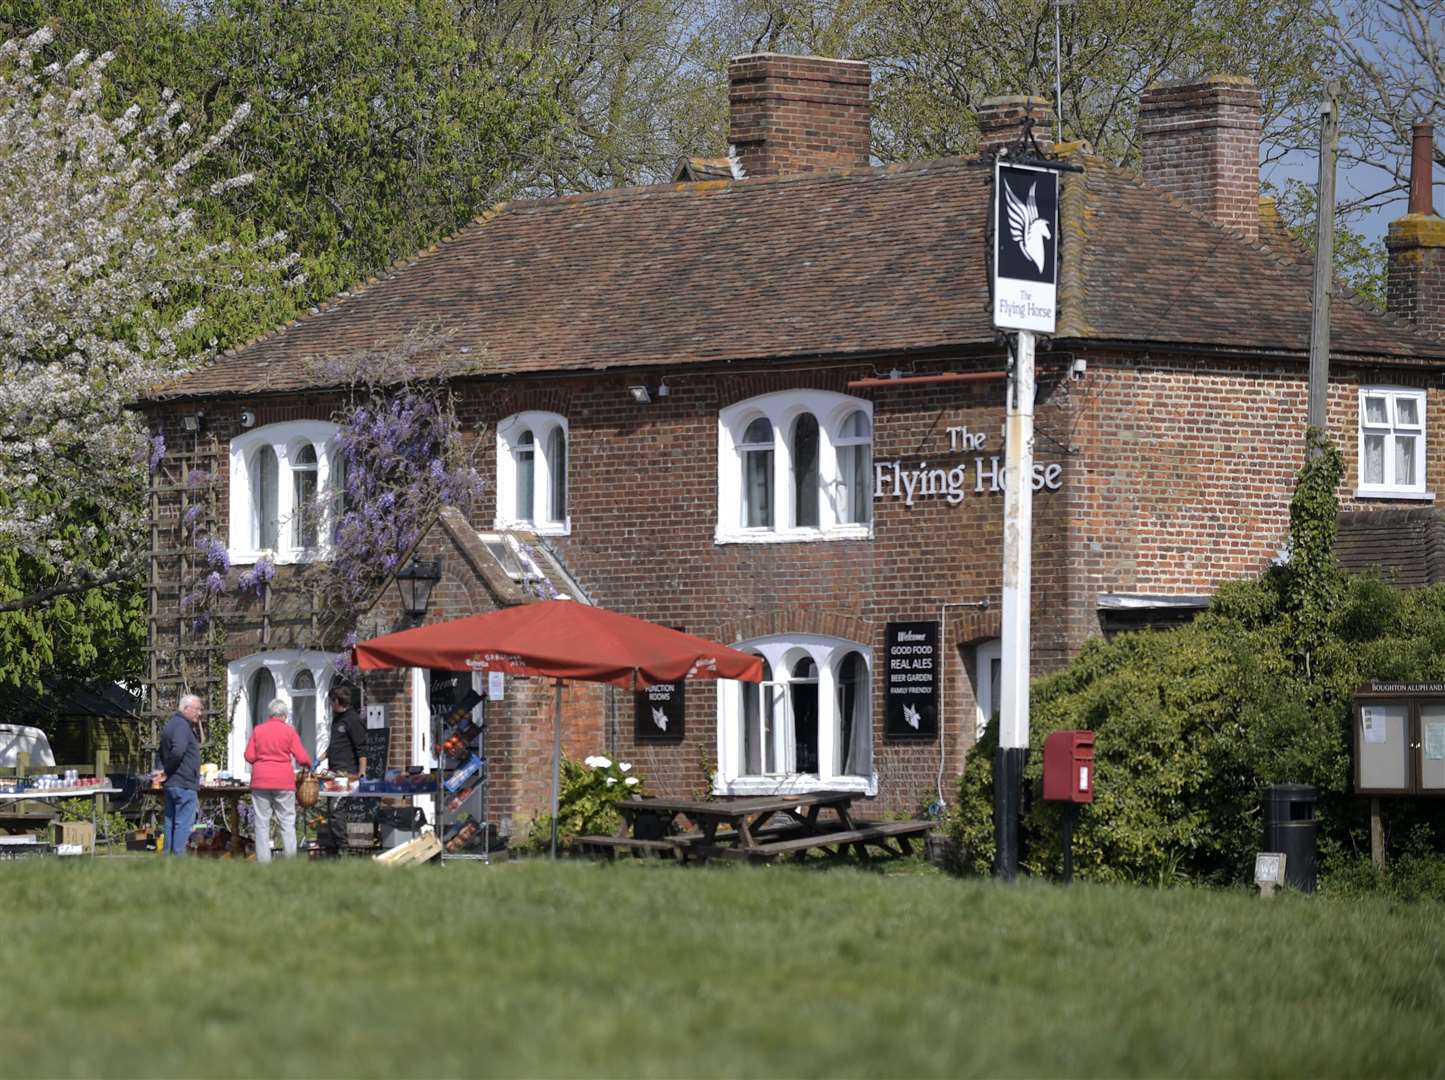 The Flying Horse is a free house facing the cricket pitch on the village green in either Boughton Aluph or Boughton Lees – I’d be grateful if someone could confirm which address is correct?